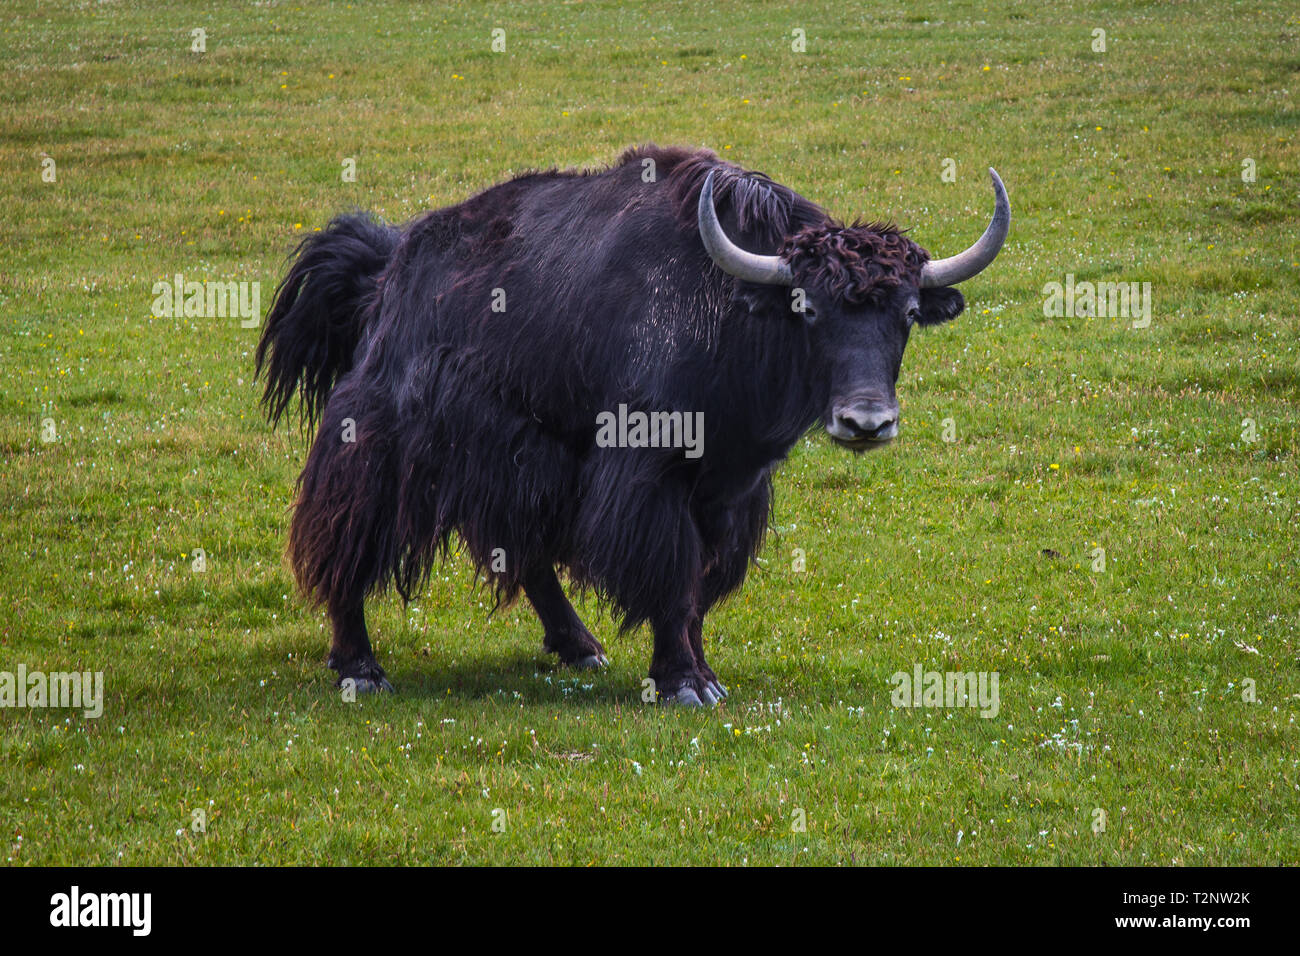 Yak Central Asia. The domestic yak is a long-haired domesticated bovid. It is descended from the wild yak. Kyrgyzstan Stock Photo